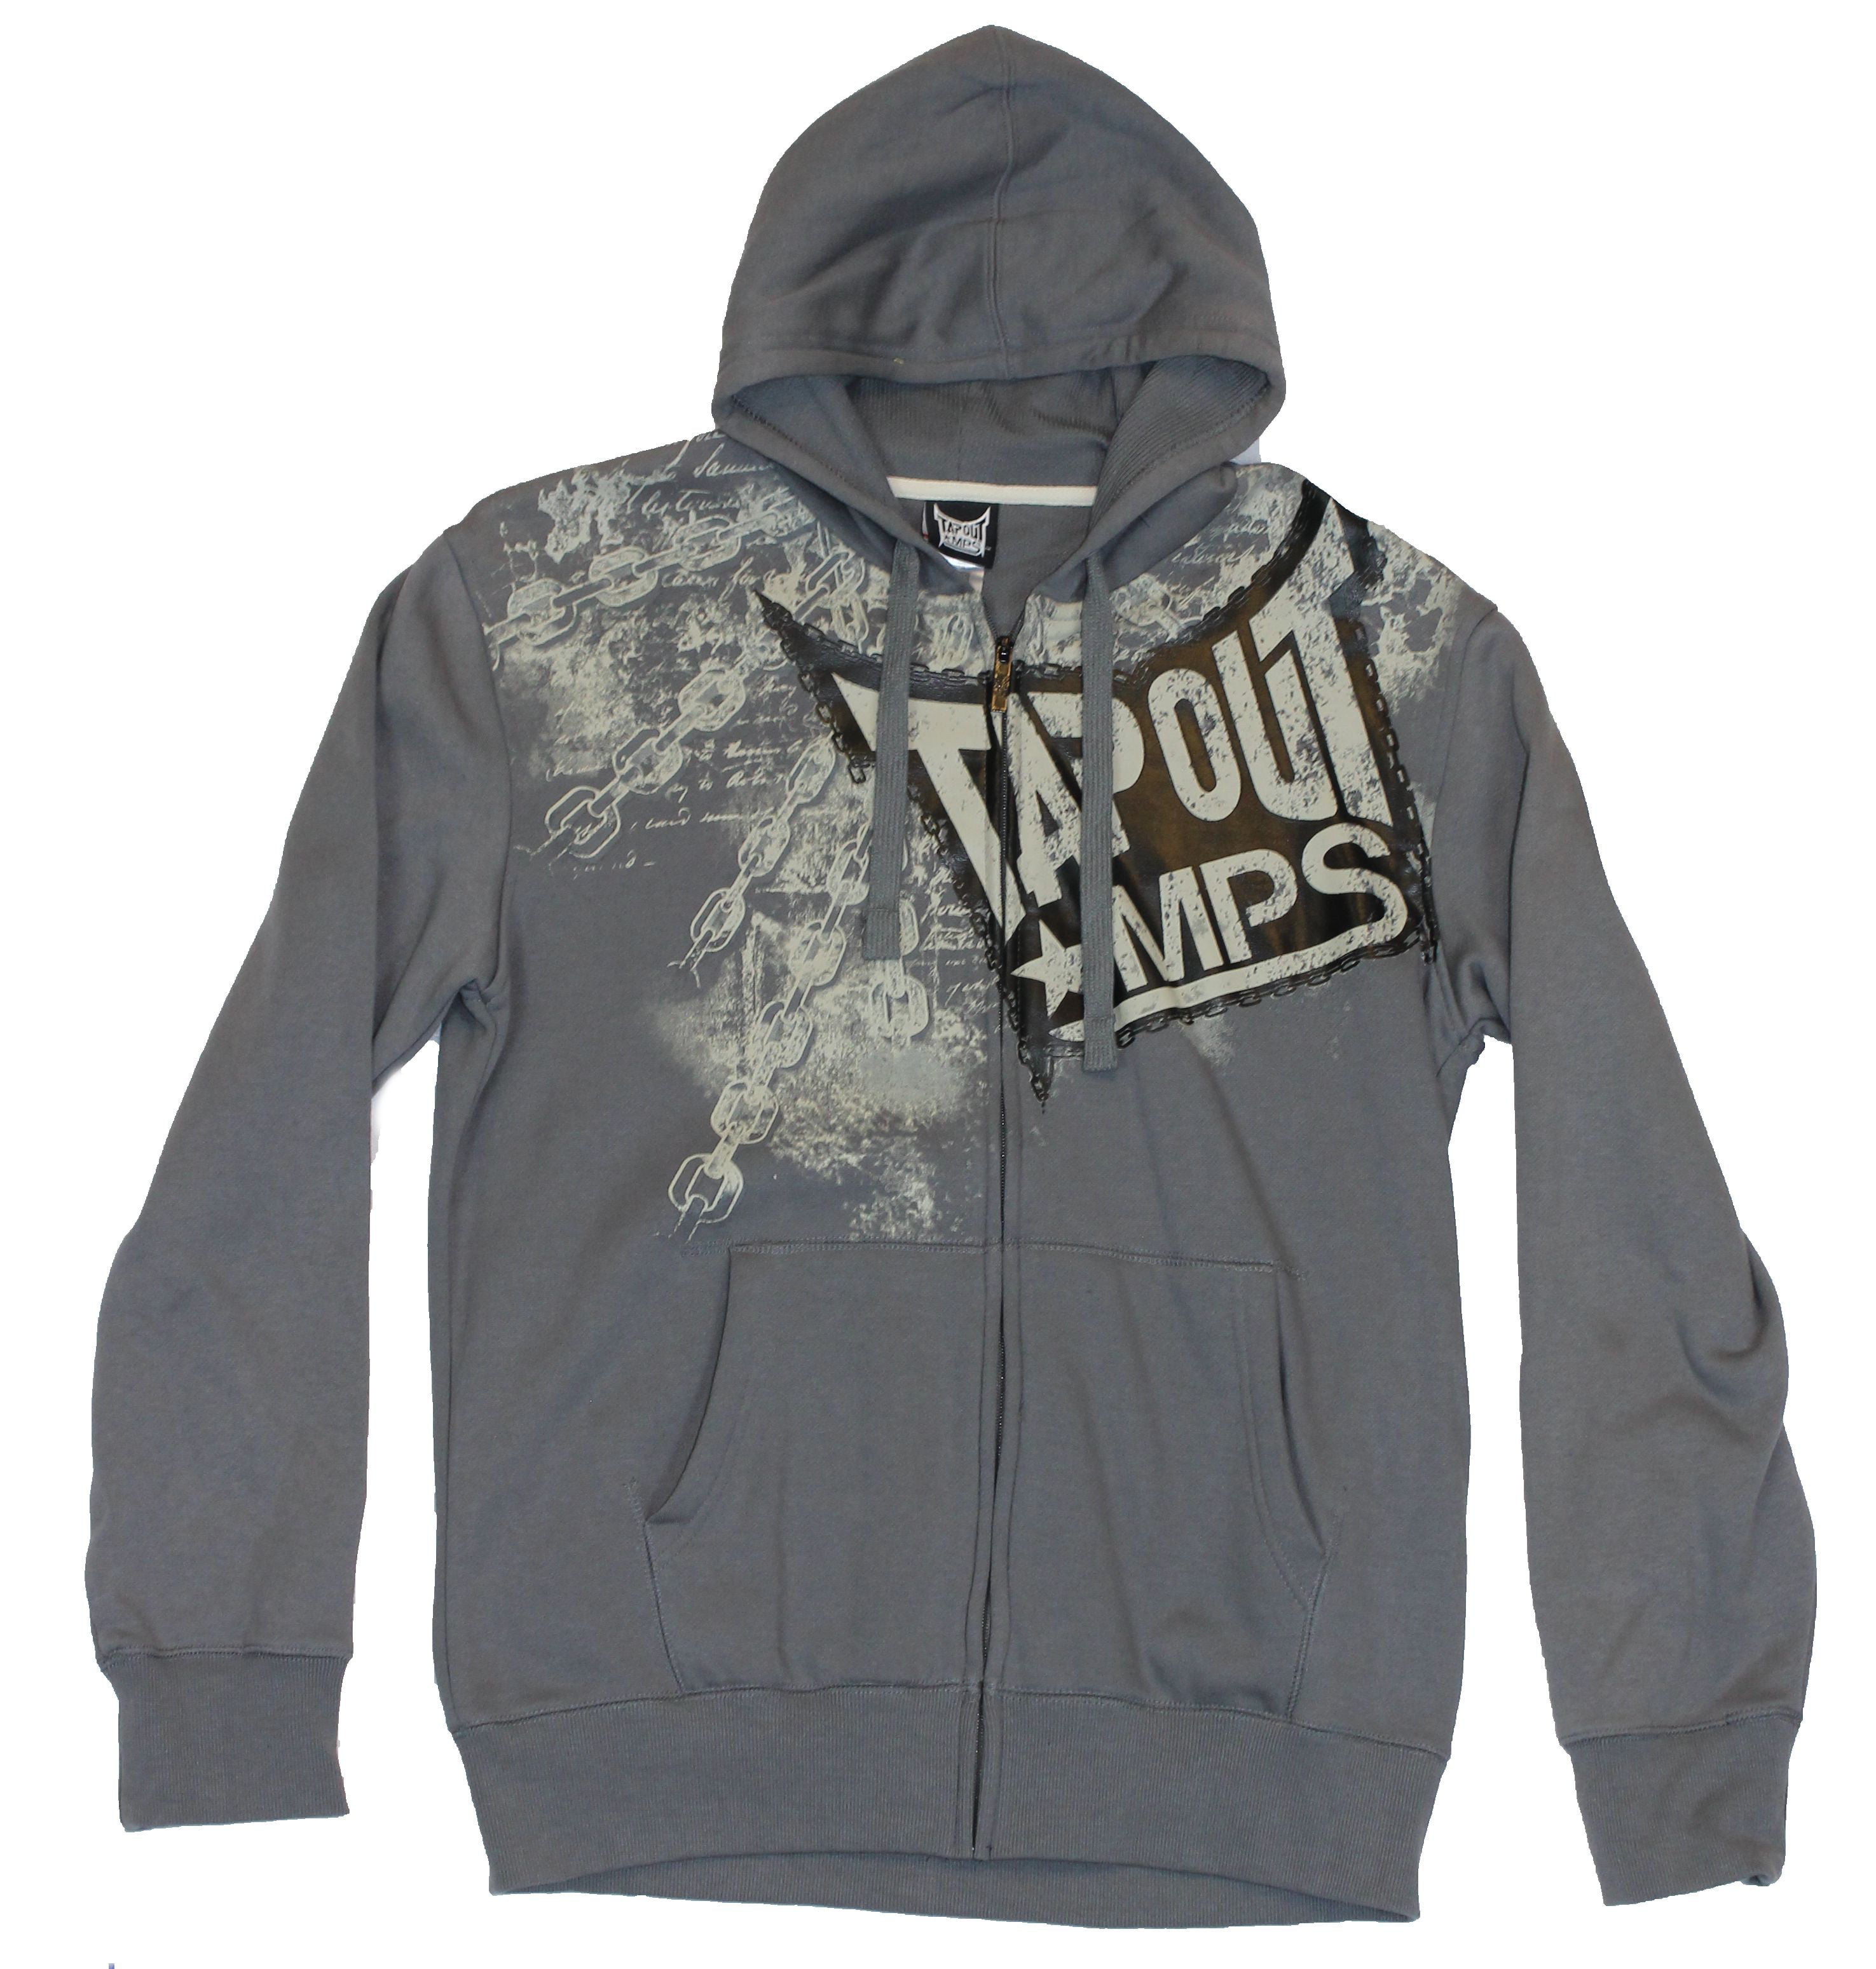 Tapout - Tapout (Tap Out MMA) MPS Mens Zip Up Hoodie - 